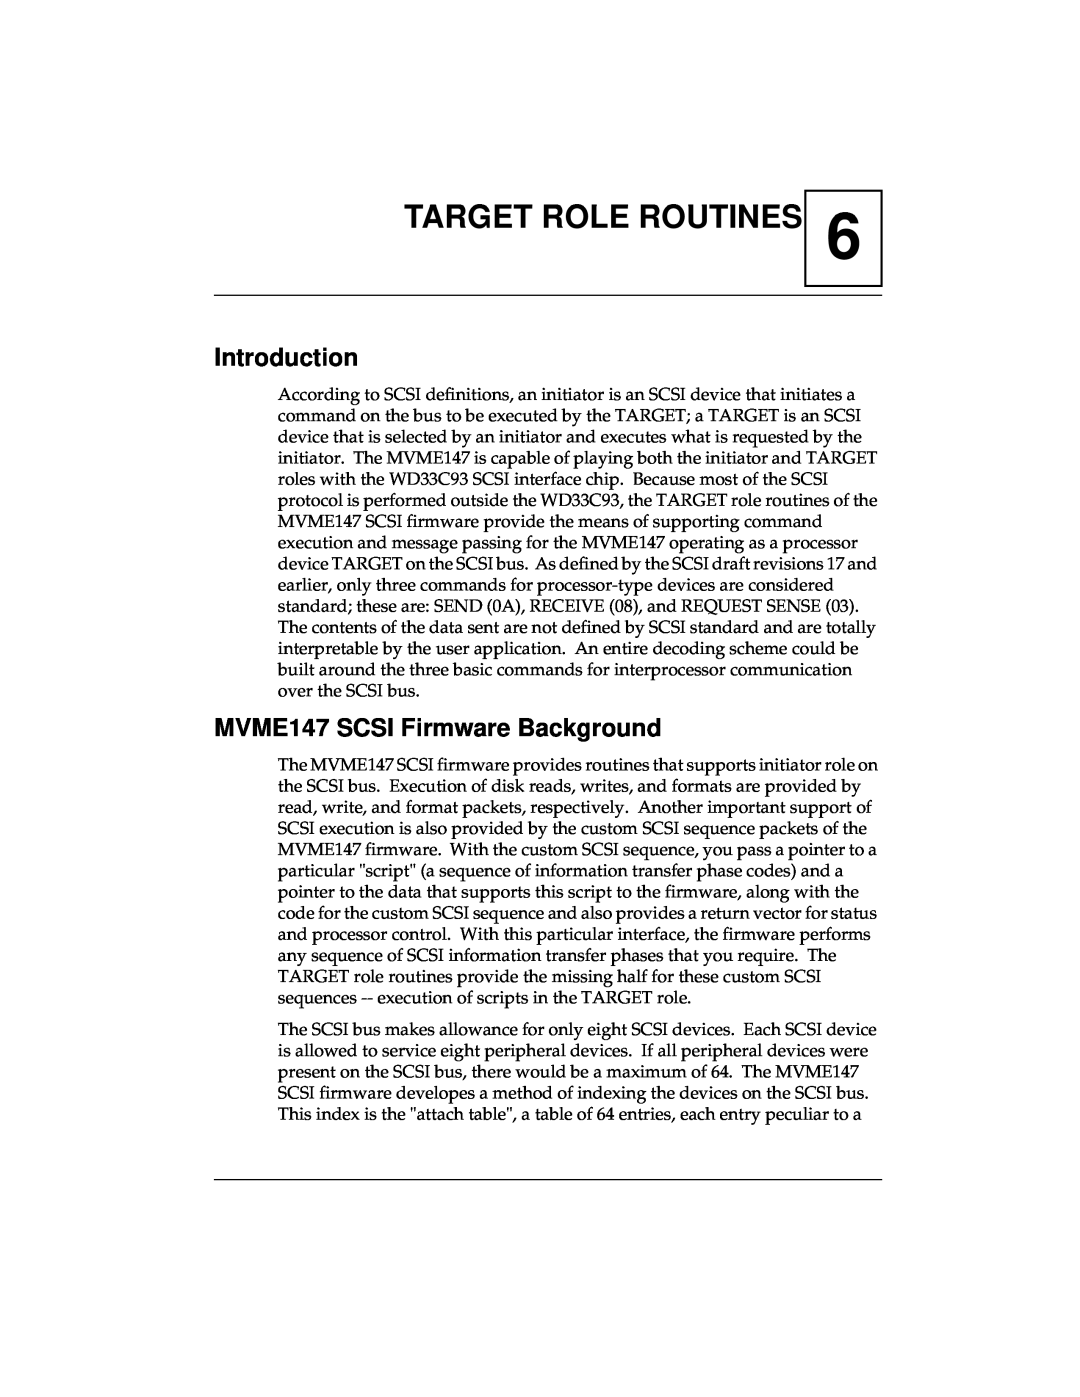 Emerson manual Target Role Routines, MVME147 SCSI Firmware Background, Introduction 